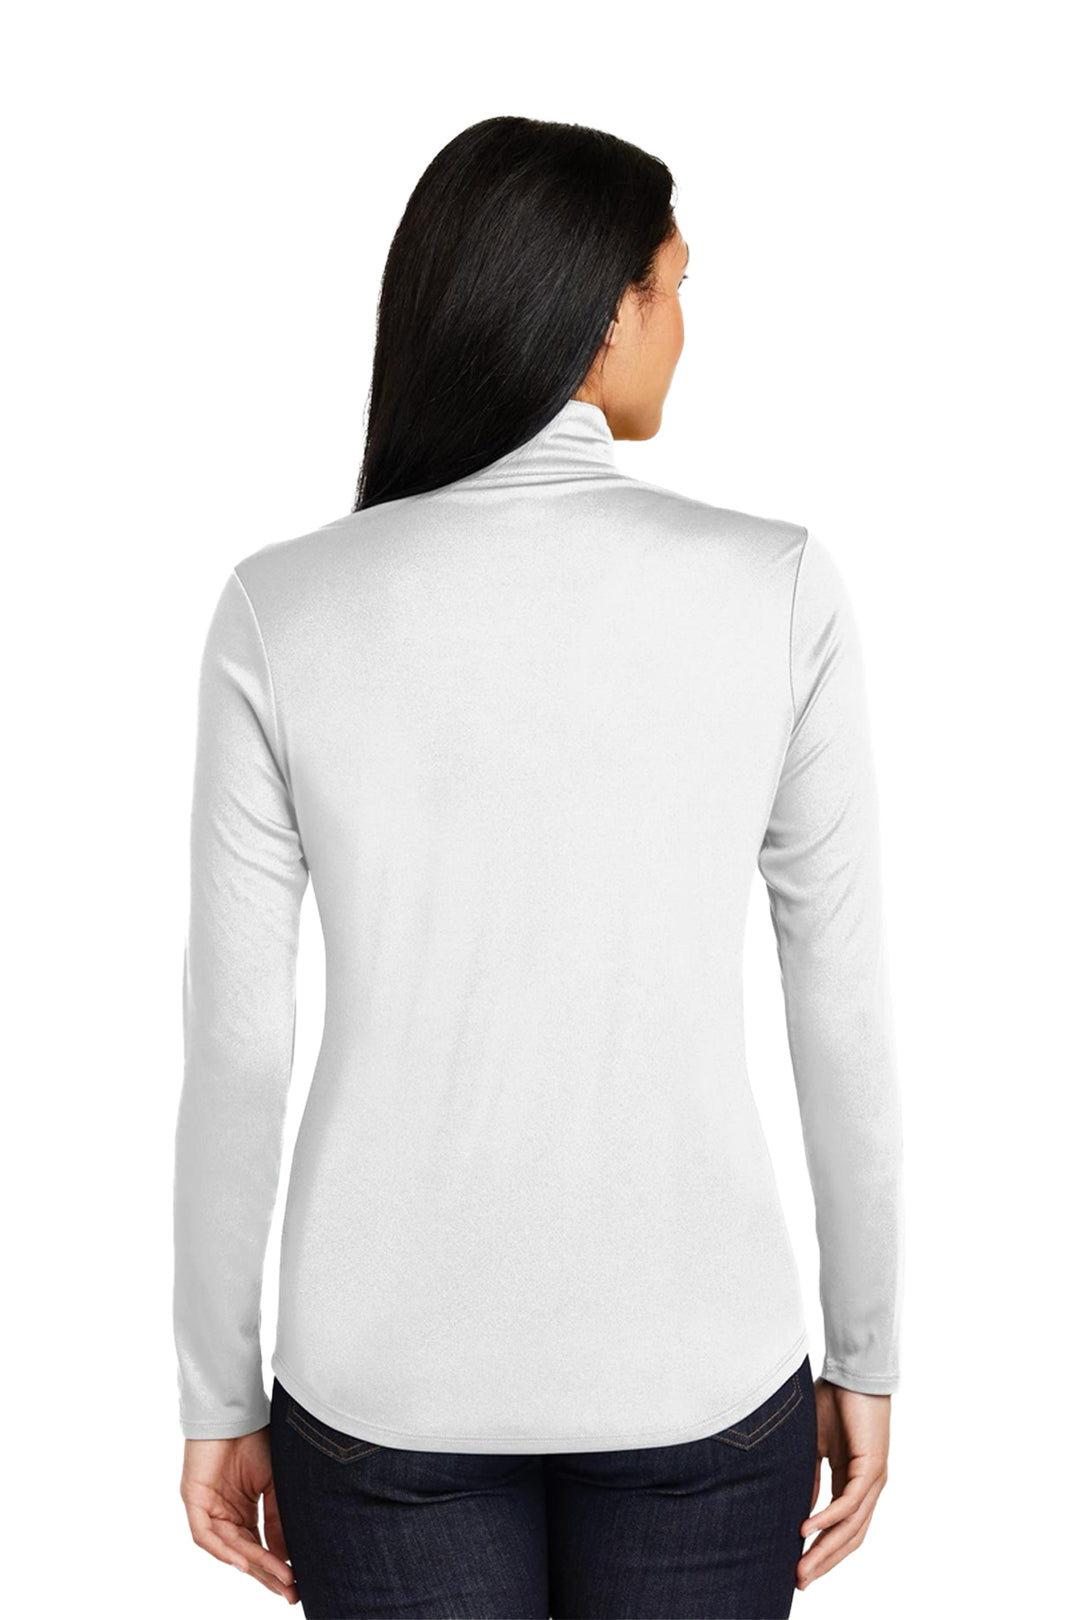 Ladies PosiCharge Competitor 1/4-Zip Pullover